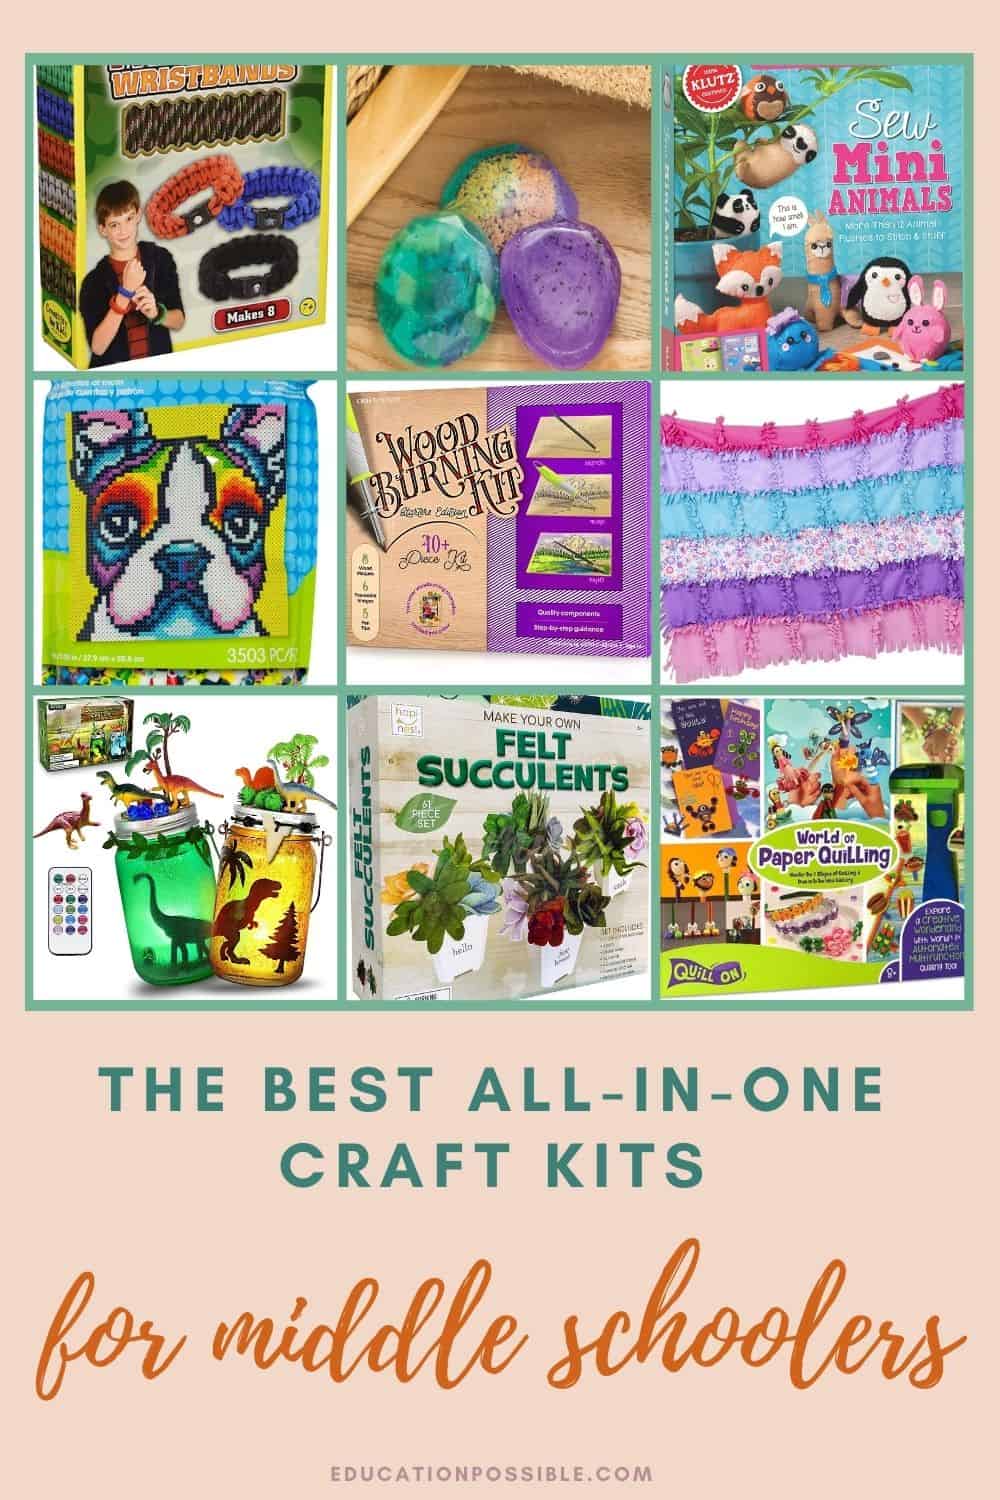 9 images in a grid of craft kits for tweens and teens.